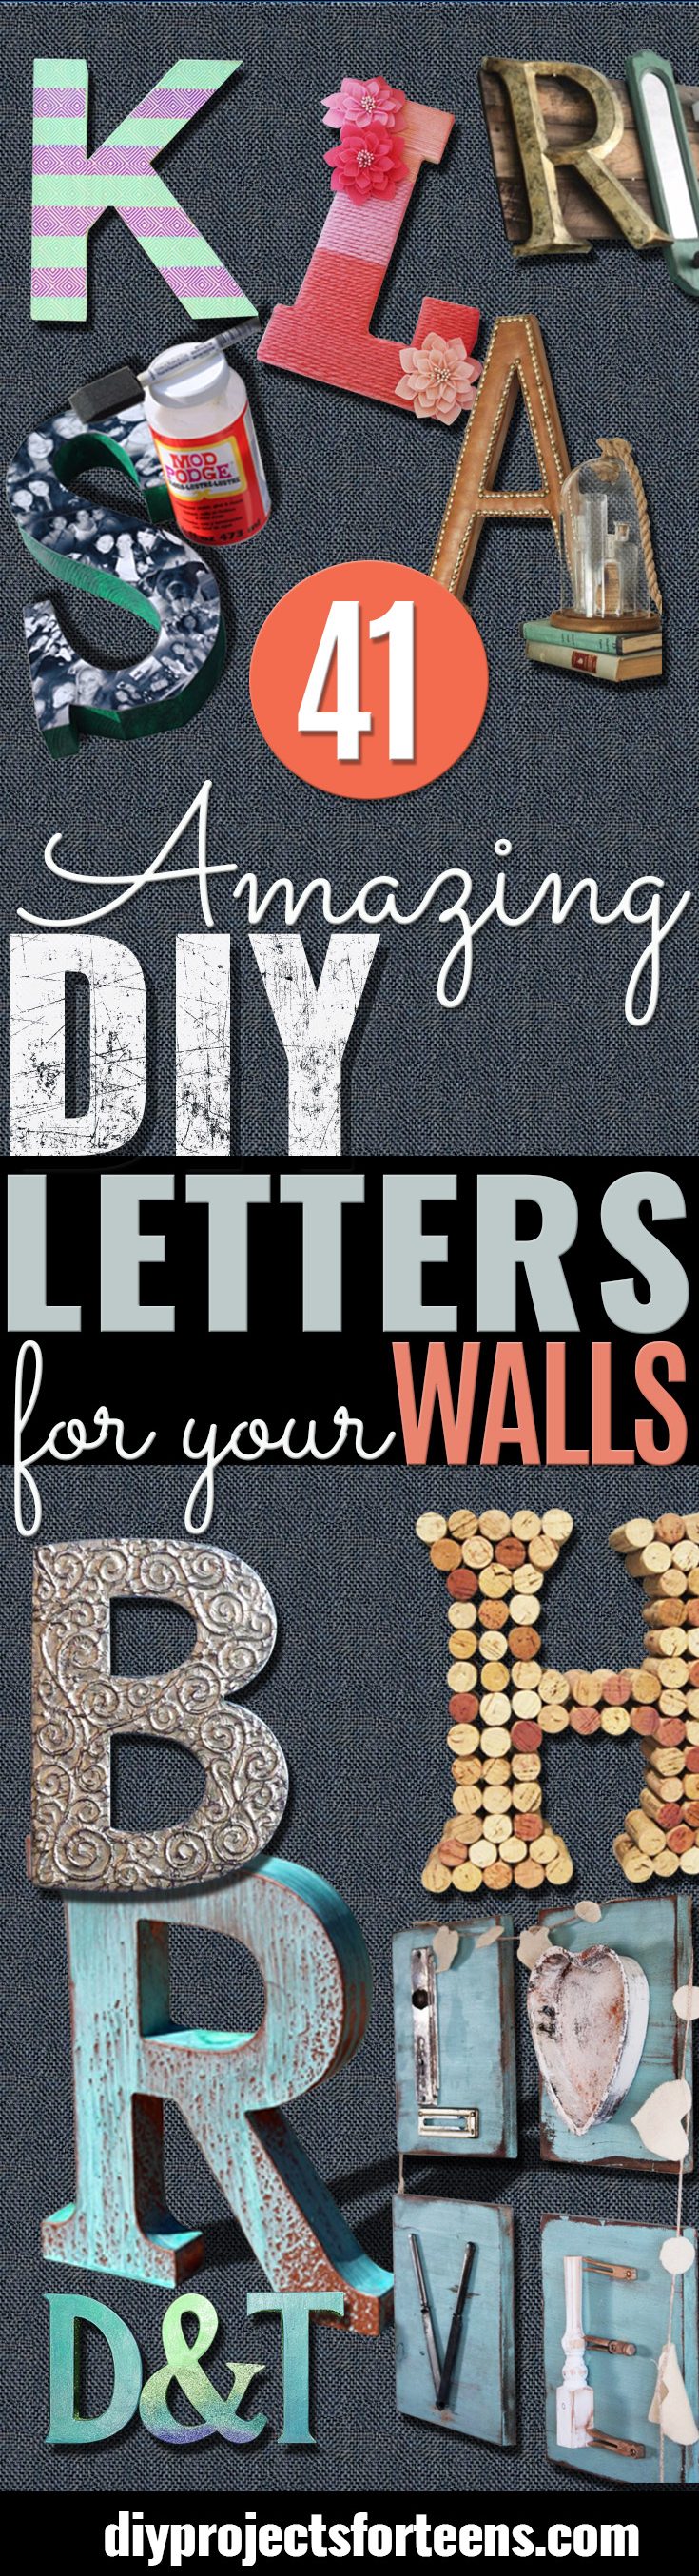 DIY Wall Letters and Initals Wall Art - Cool Architectural Letter Projects for Living Room Decor, Bedroom Ideas. Girl or Boy Nursery. Paint, Glitter, String Art, Easy Cardboard and Rustic Wooden Ideas